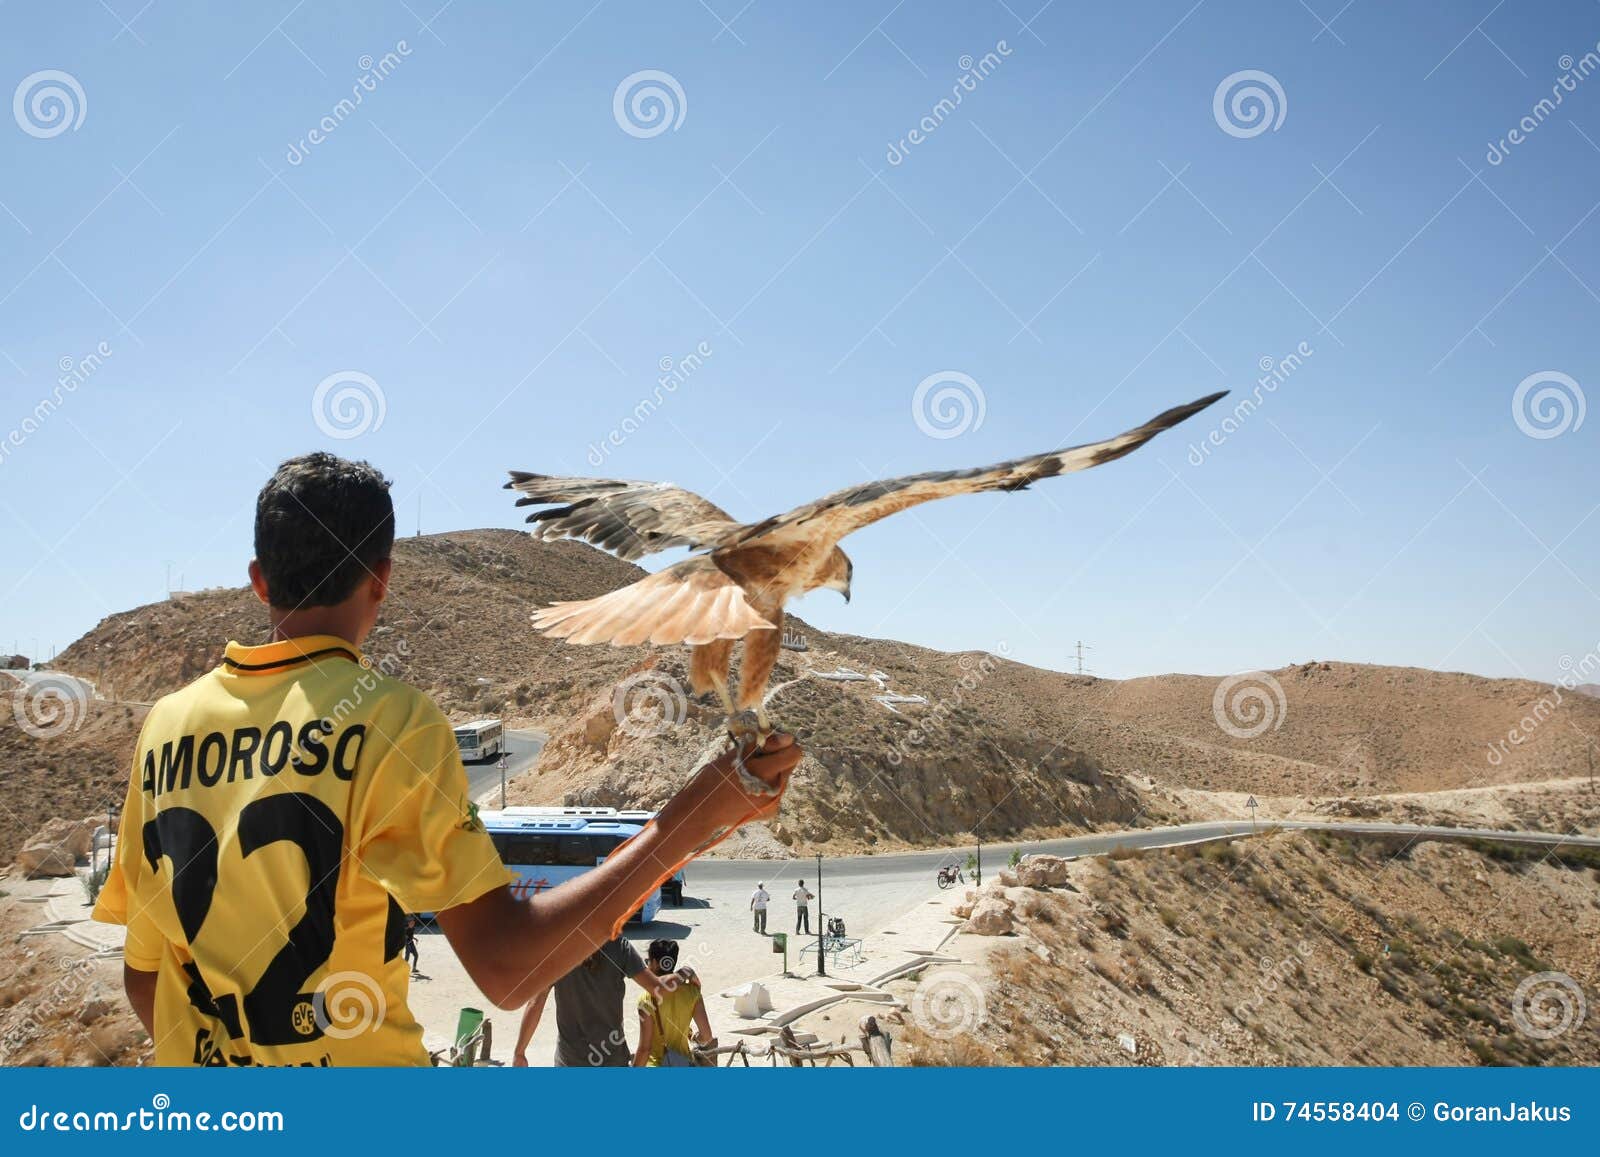 Tunisian man holding hawk. MATMATA, TUNISIA - SEPTEMBER 17, 2012 : A rear view of a Tunisian man holding a hawk for photographing with tourists at a tourist stop in Matmata with a view of rocky desert in Matmata, Tunisia.